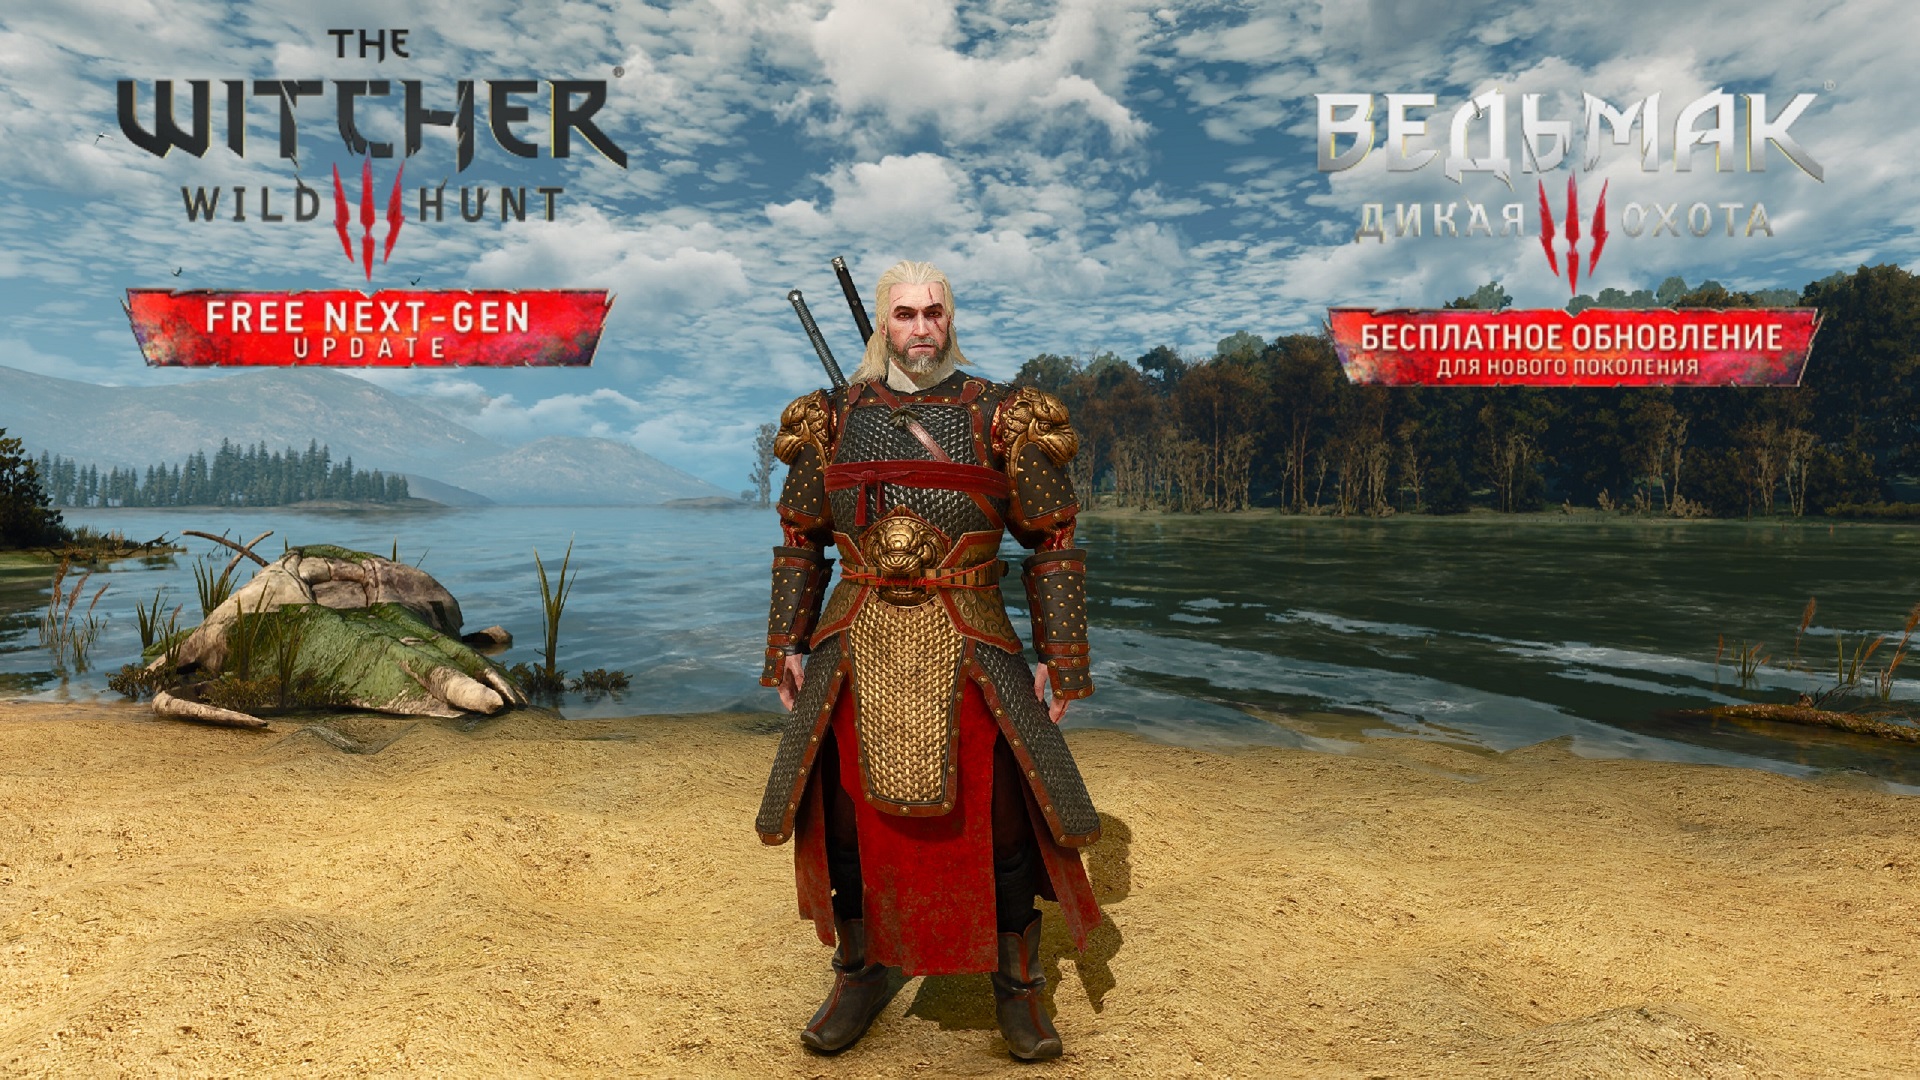 The witcher 3 next gen patch фото 81